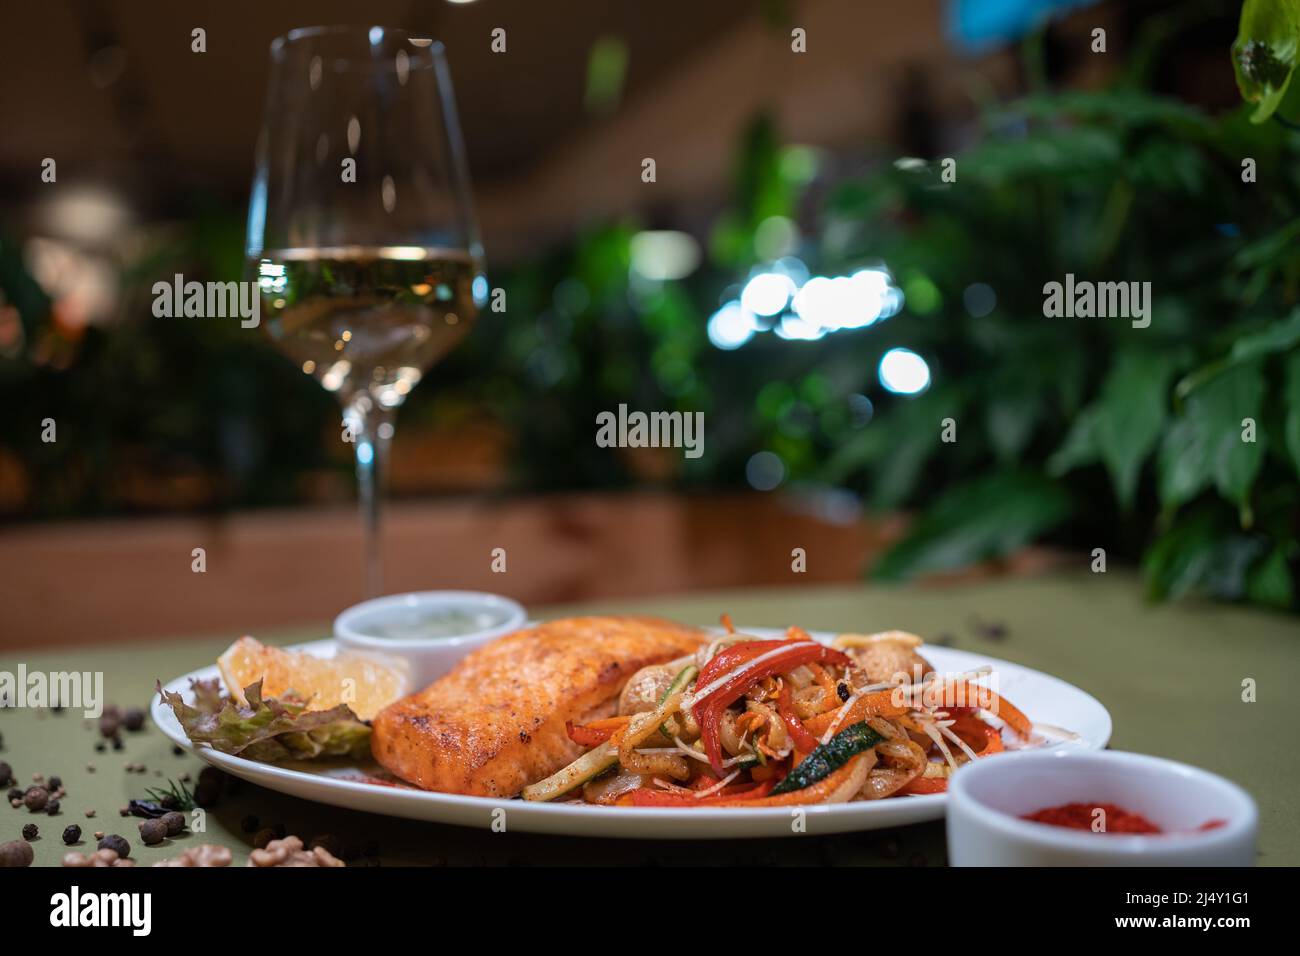 roasted salmon steak with wok vegetable and sauce on white plate in restaurant Stock Photo